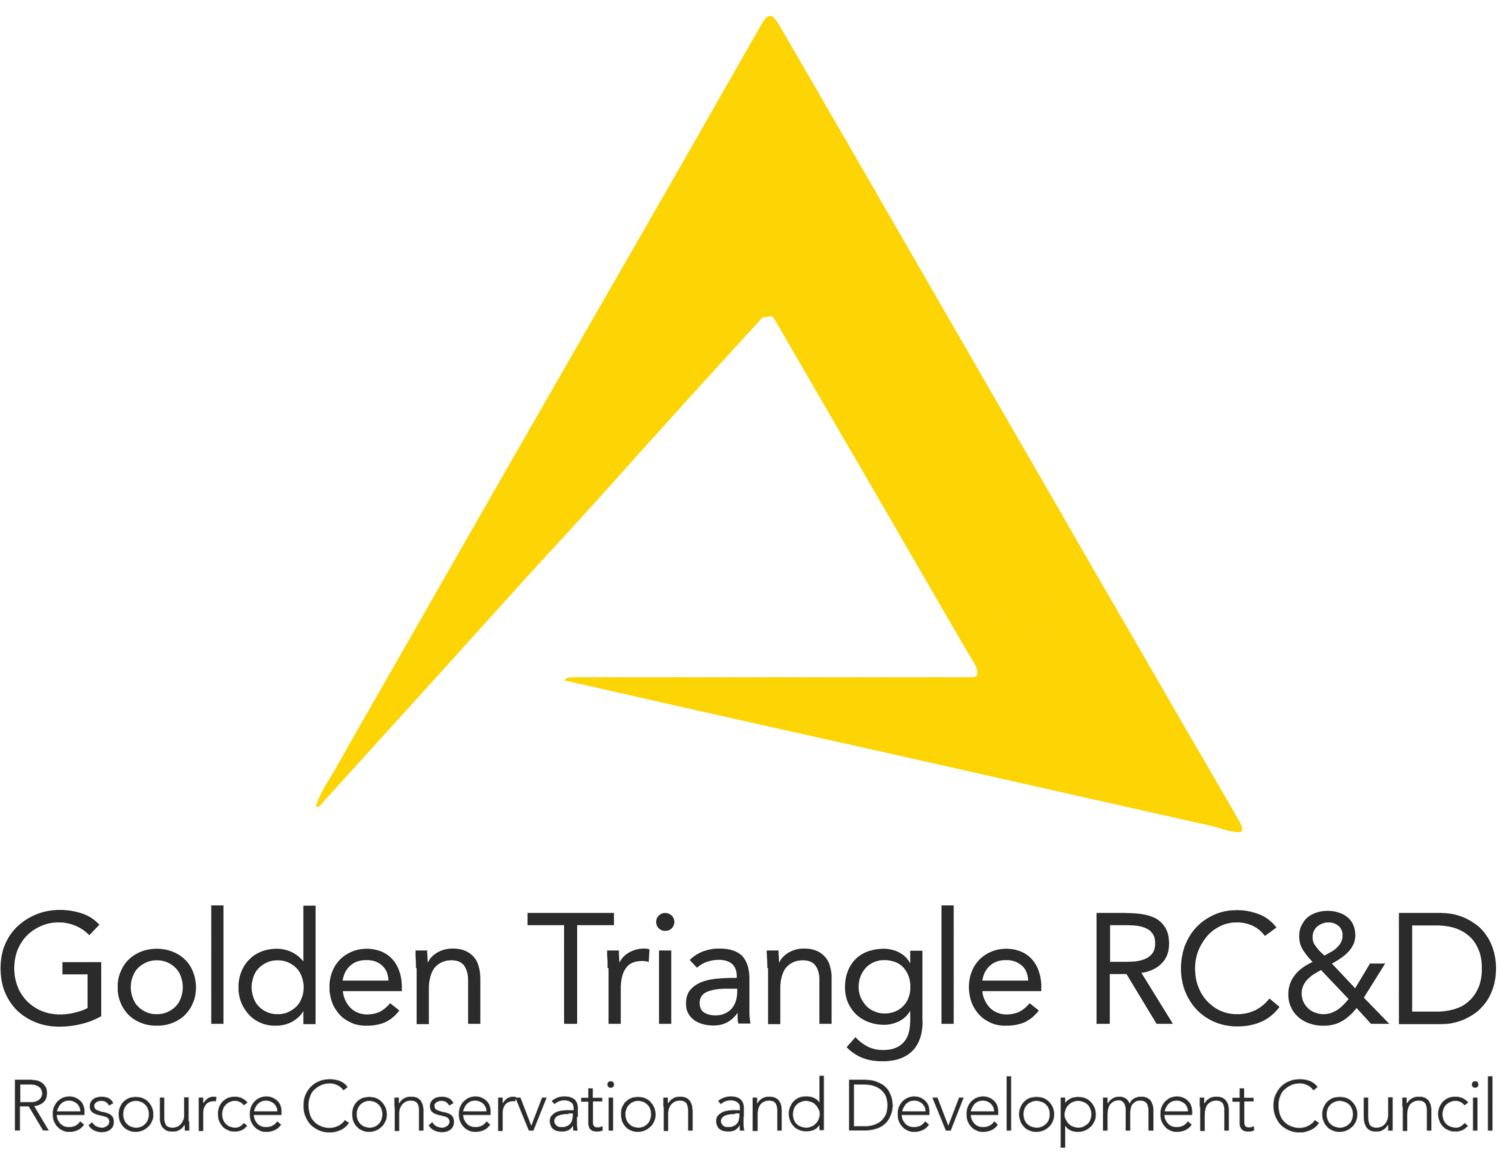 Five Triangle Logo - Urban Five Star - Completed Project — Golden Triangle RC&D